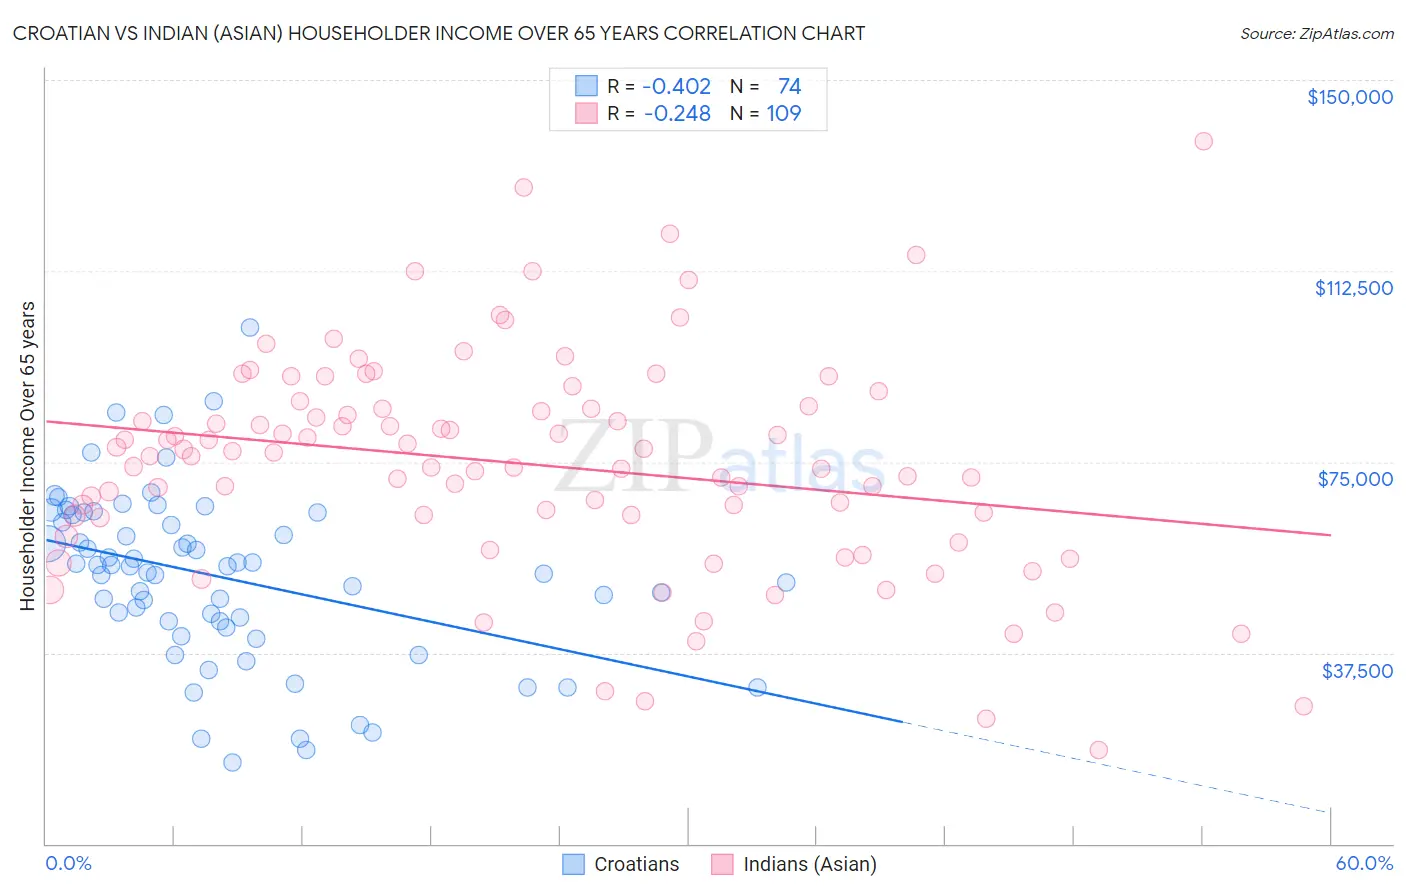 Croatian vs Indian (Asian) Householder Income Over 65 years